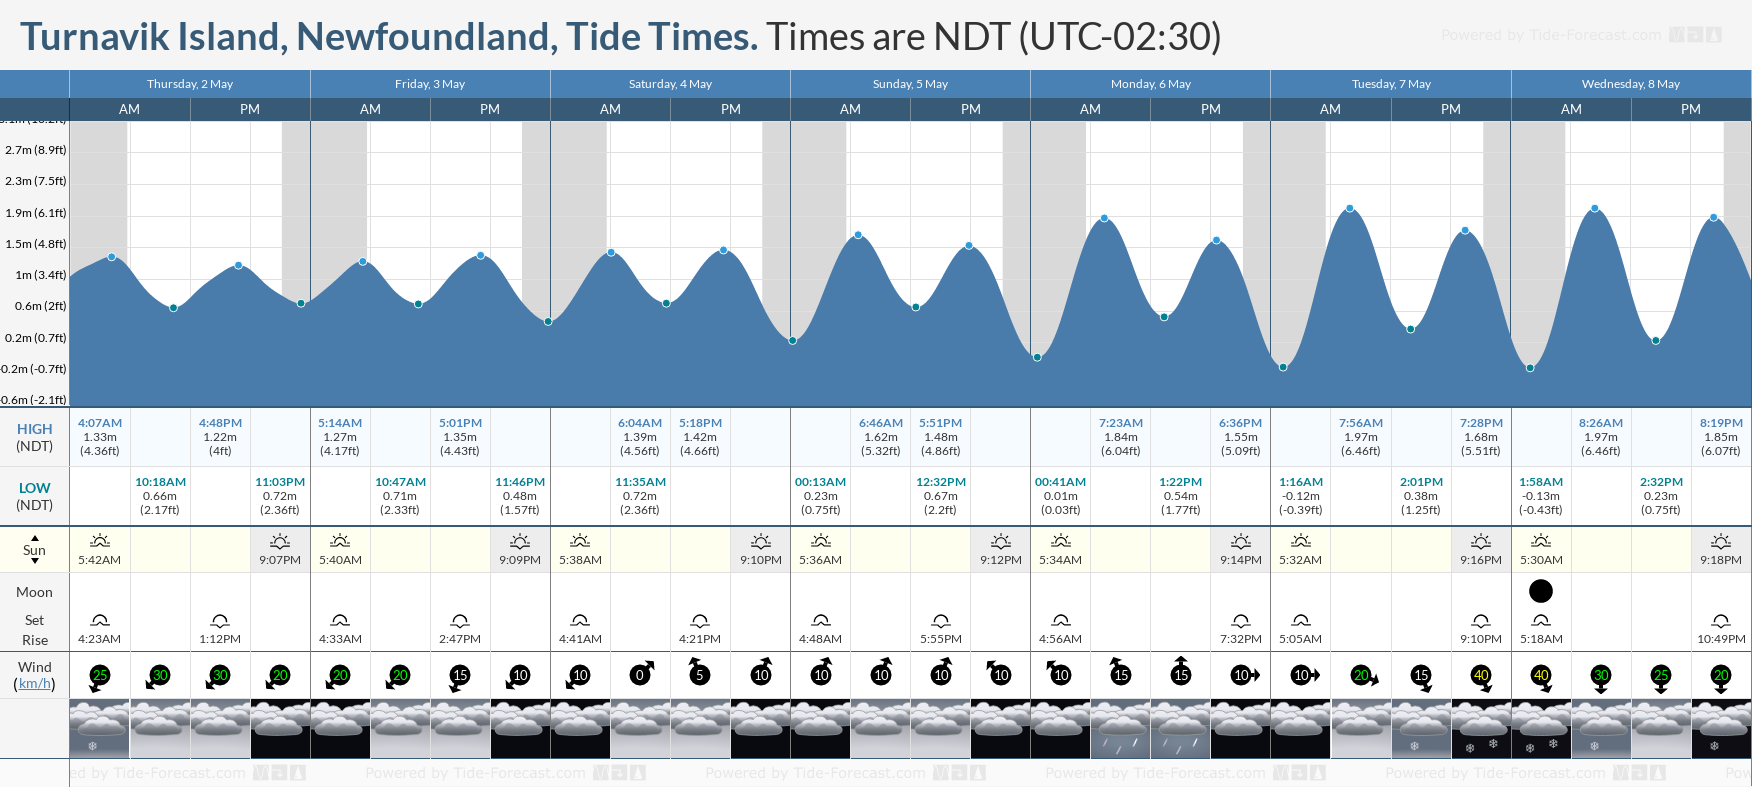 Turnavik Island, Newfoundland Tide Chart including high and low tide tide times for the next 7 days